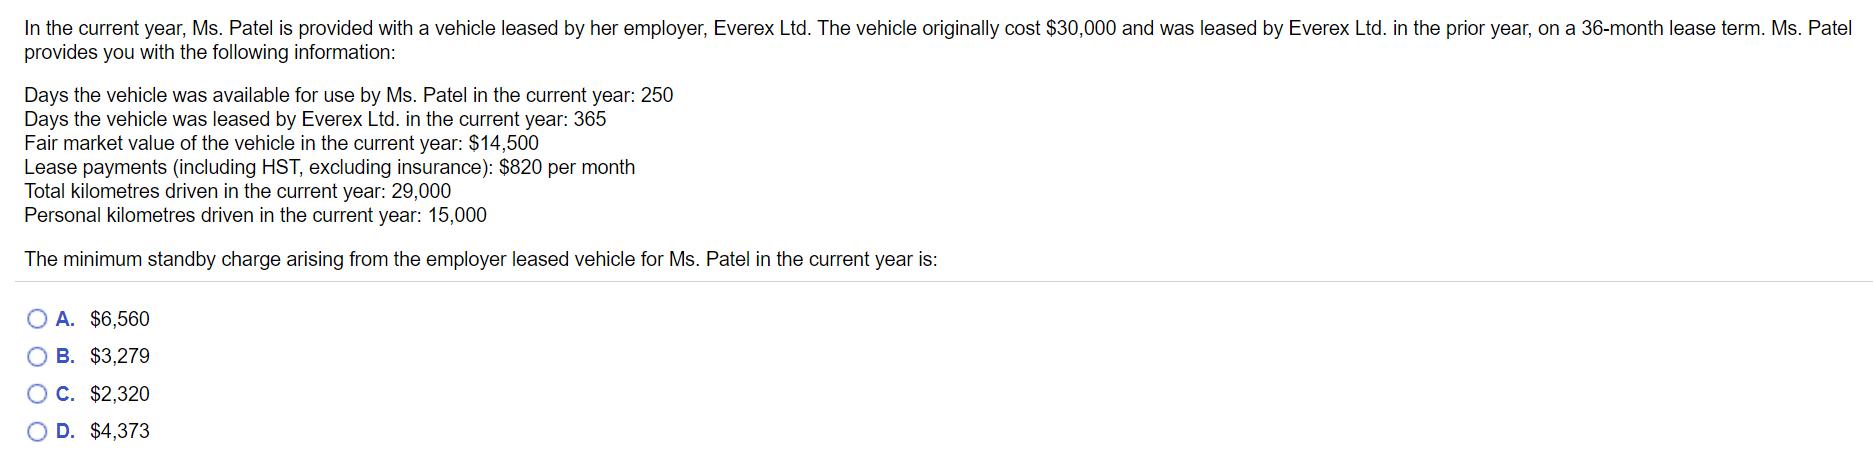 In the current year, Ms. Patel is provided with a vehicle leased by her employer, Everex Ltd. The vehicle originally cost $30